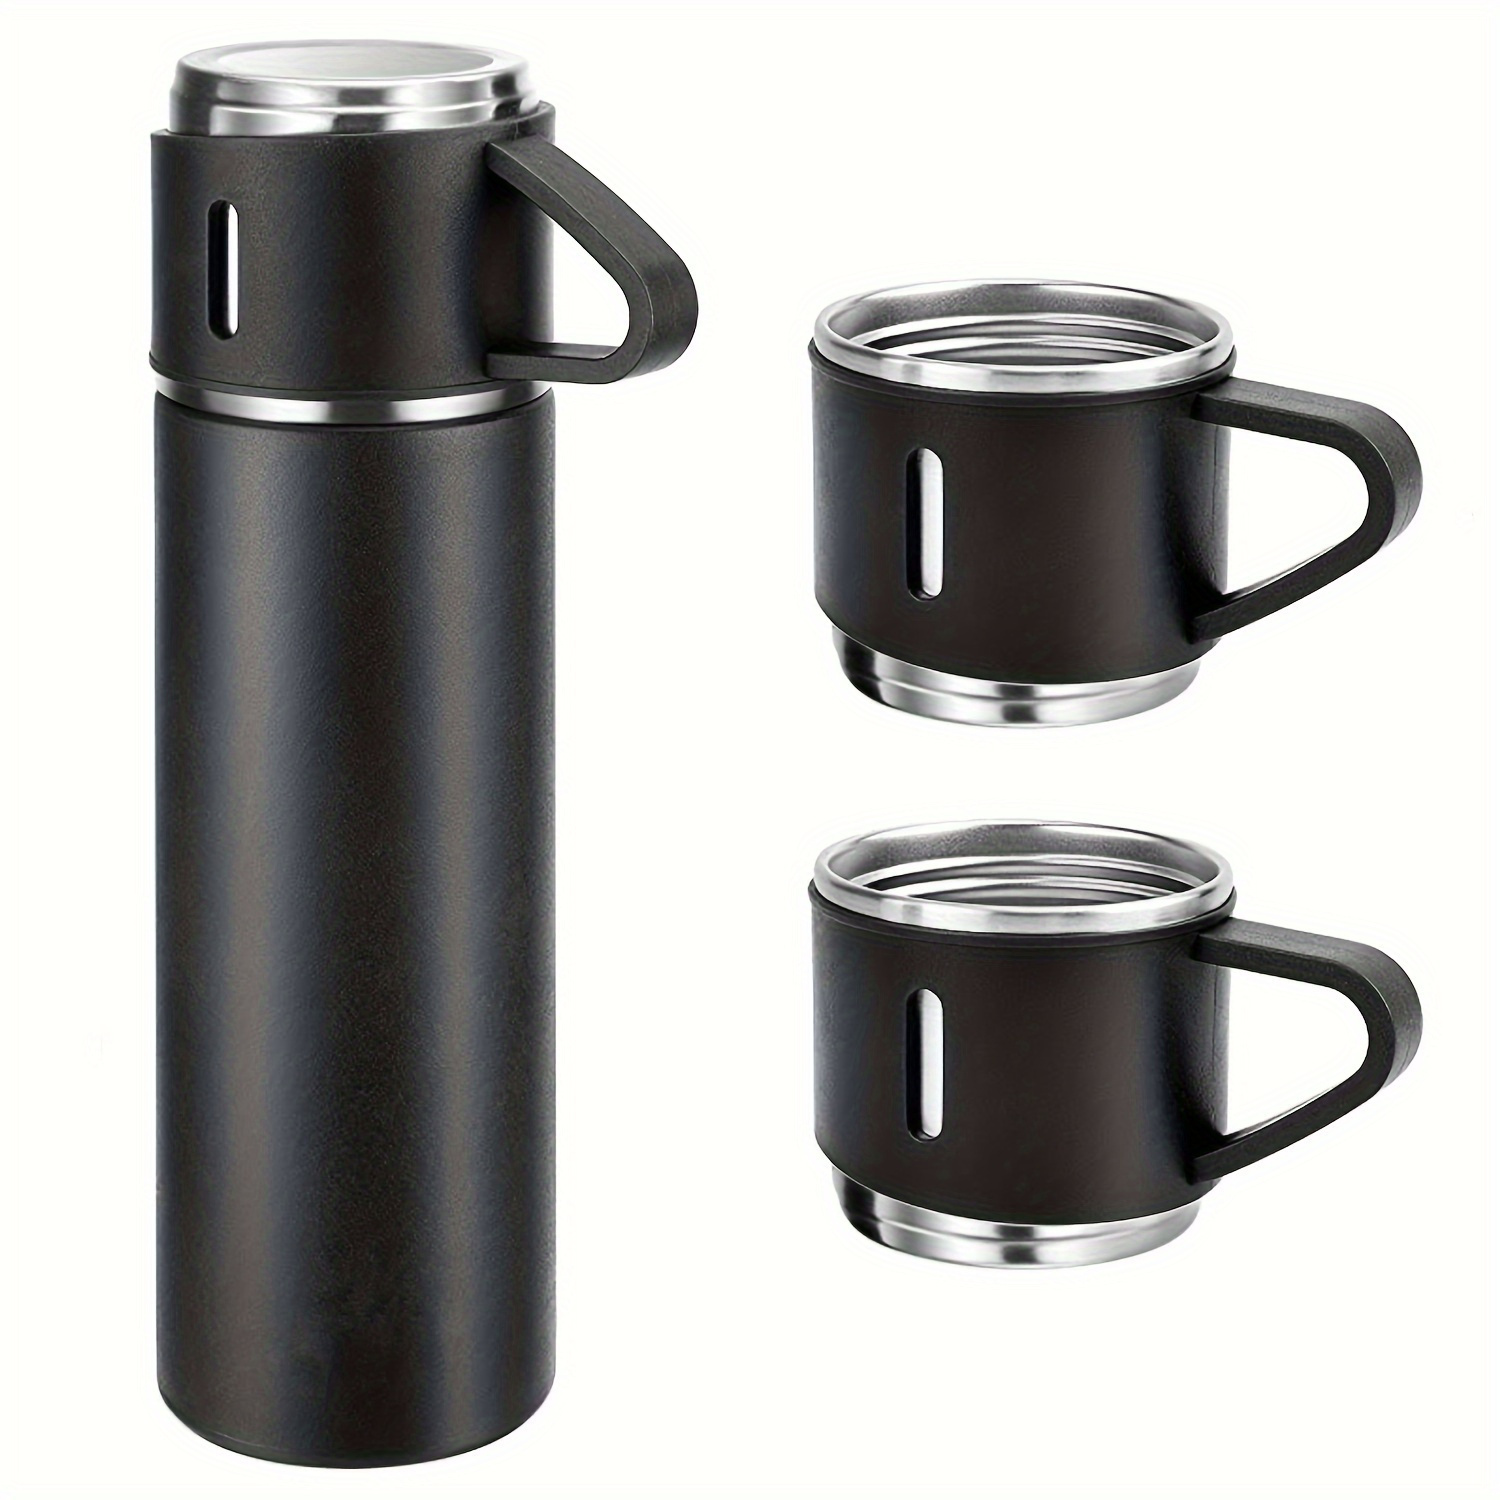 

handwash-friendly" 16.9oz Stainless Steel Vacuum Set - Insulated Travel Mug For Hot & Cold Drinks, Shatterproof